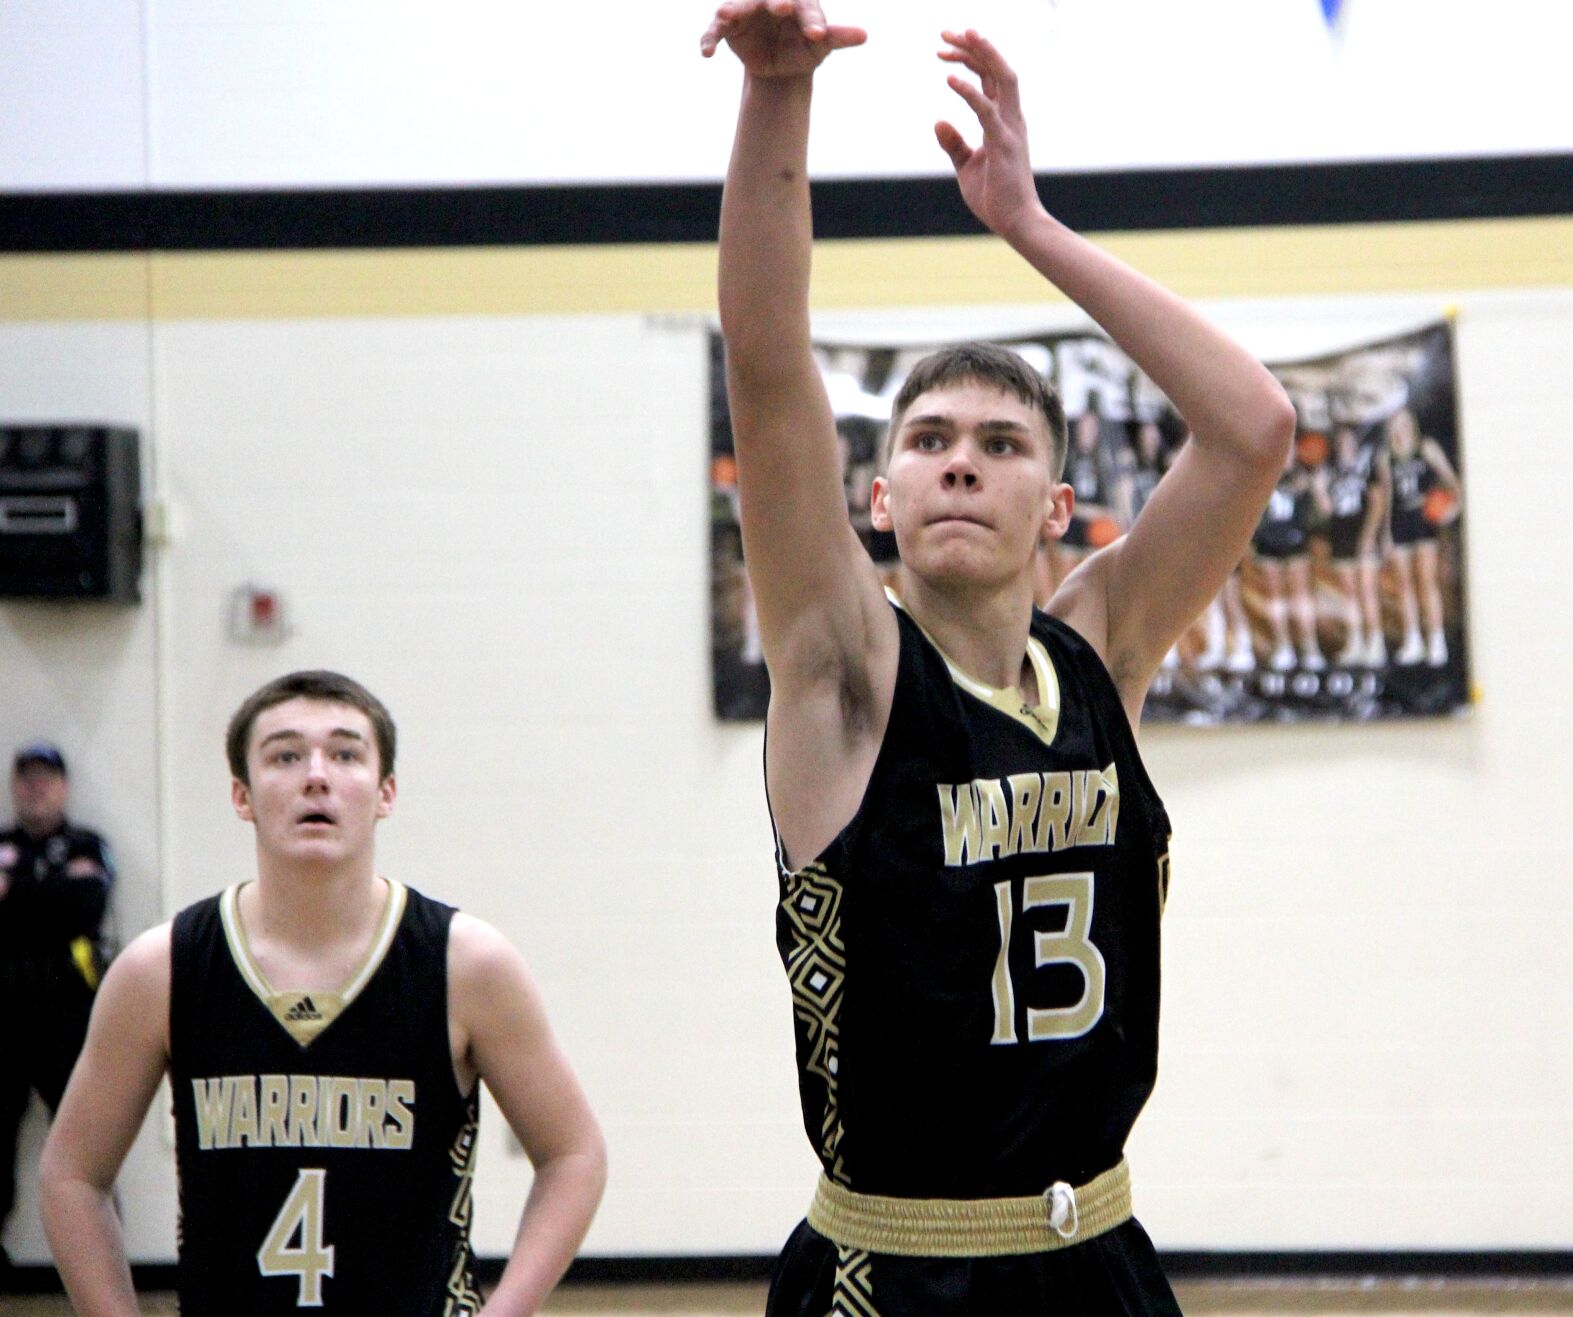 Warriors Boys Basketball Team Ends Season With Dominant Wins Against Lancers and Ramblers